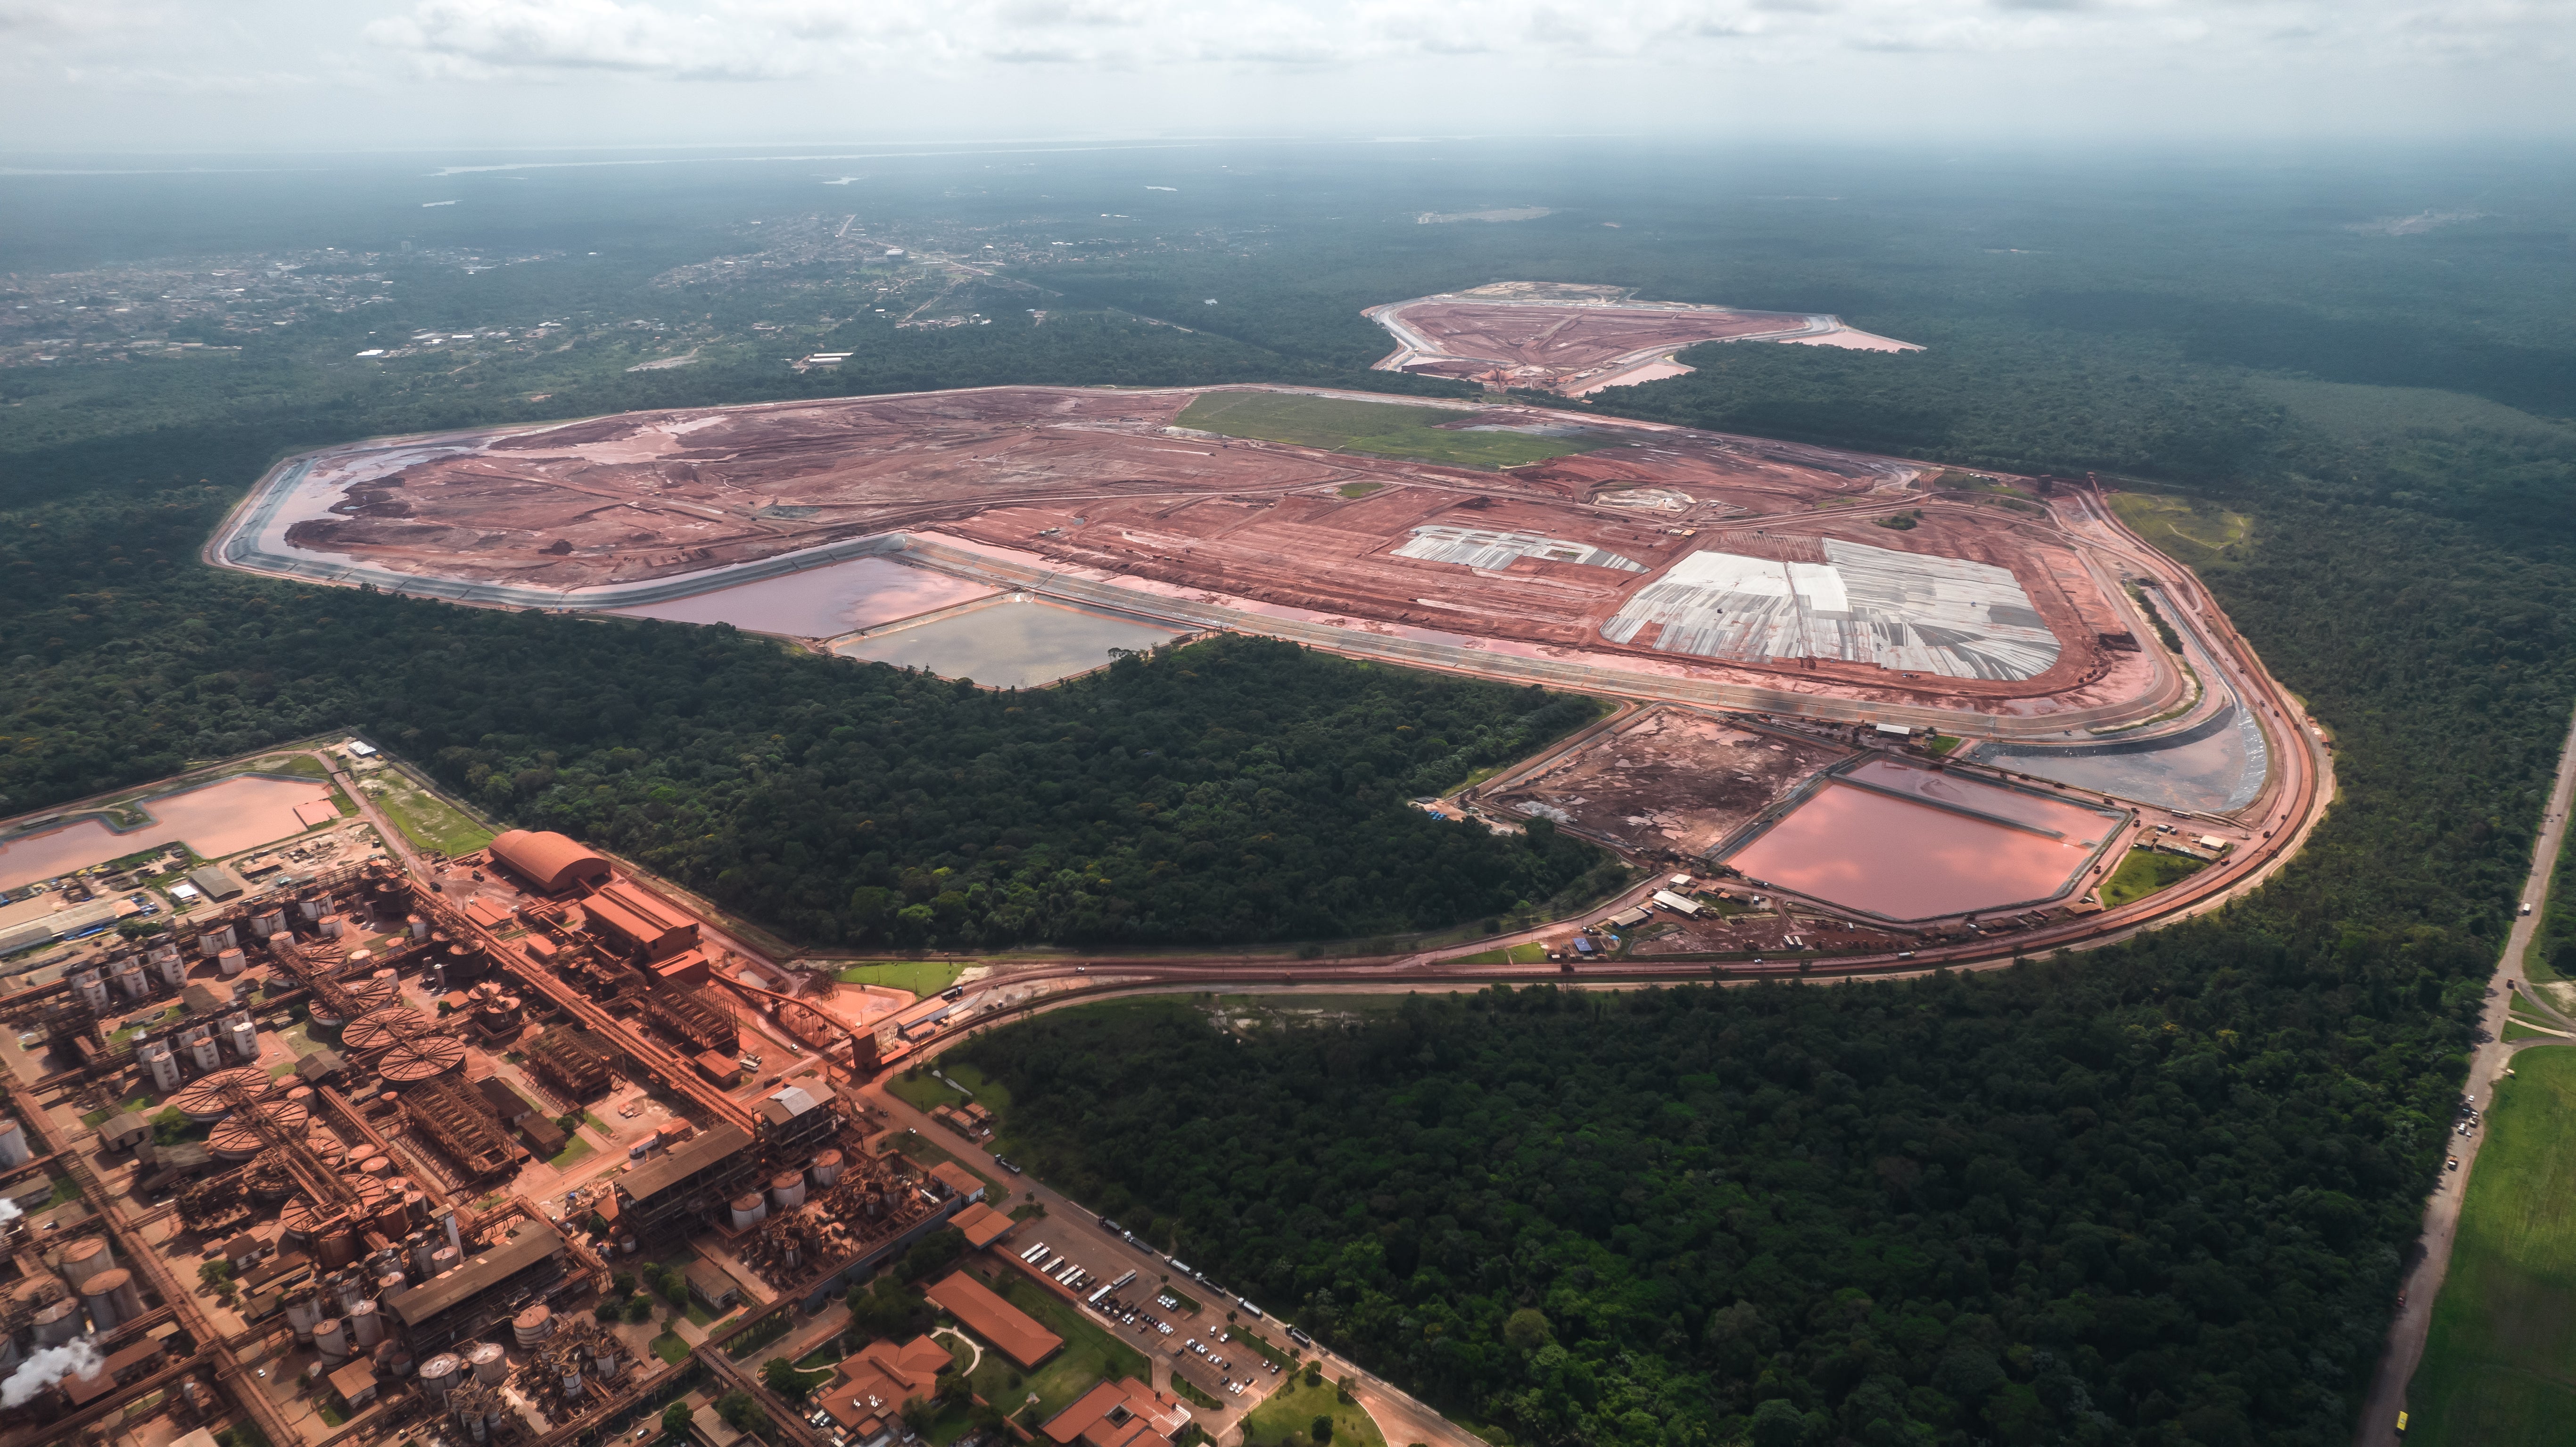 Mining Aluminium for the Ford F-150 Lightning Is Allegedly Making Thousands in the Amazon Rainforest Sick